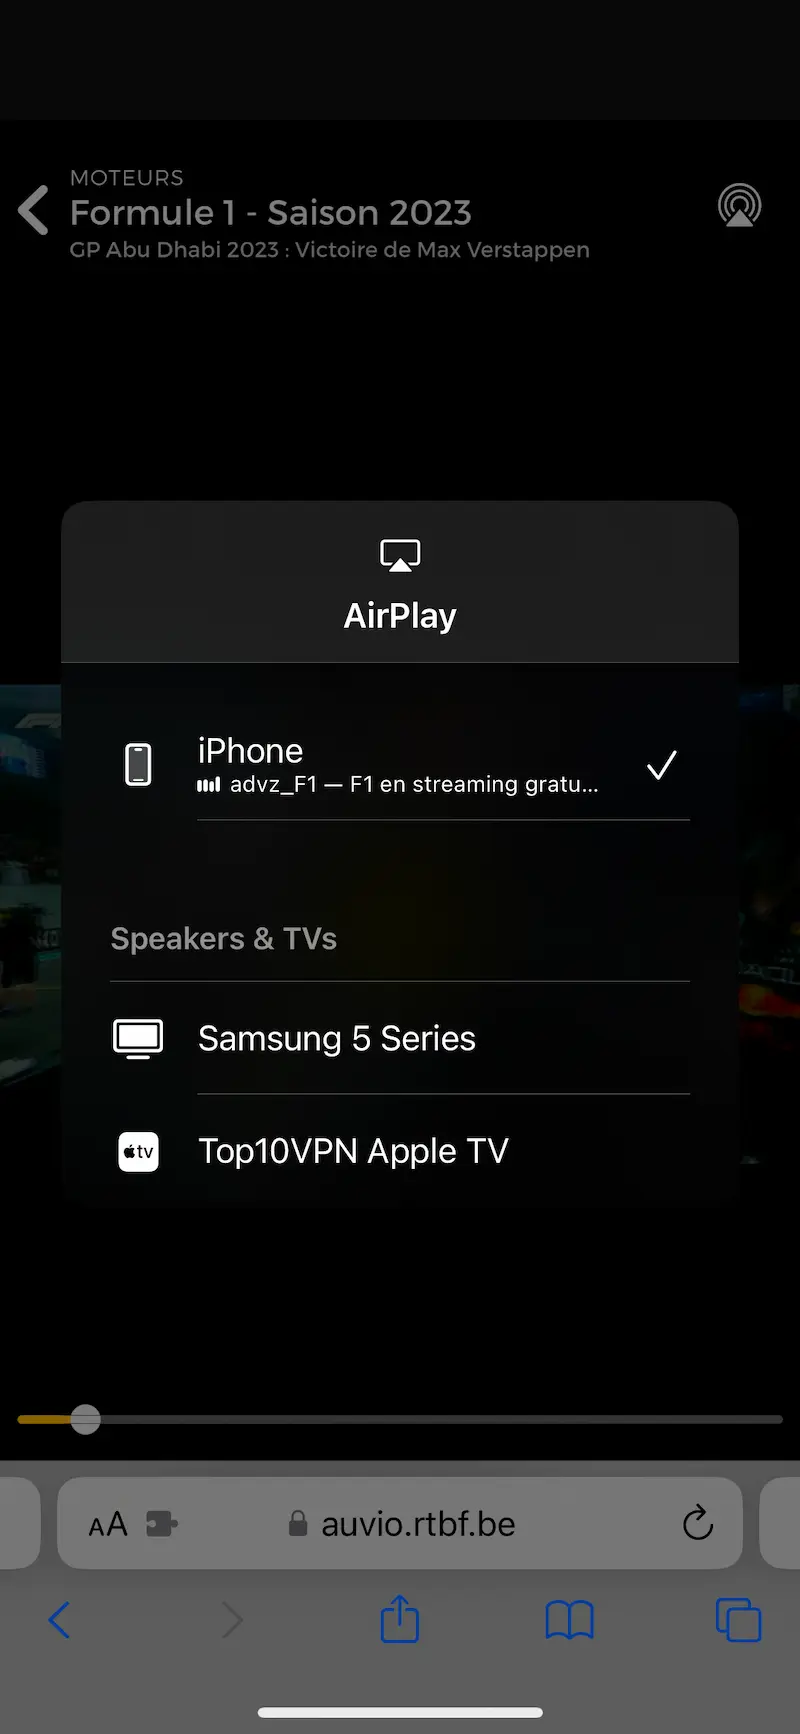 RTBF Auvio streaming interface with an AirPlay menu open, showing F1 as the selected media. Devices listed include 'iPhone', 'Samsung 5 Series', and 'Top10VPN Apple TV'. The interface also includes the website 'auvio.rtbf.be' at the bottom.